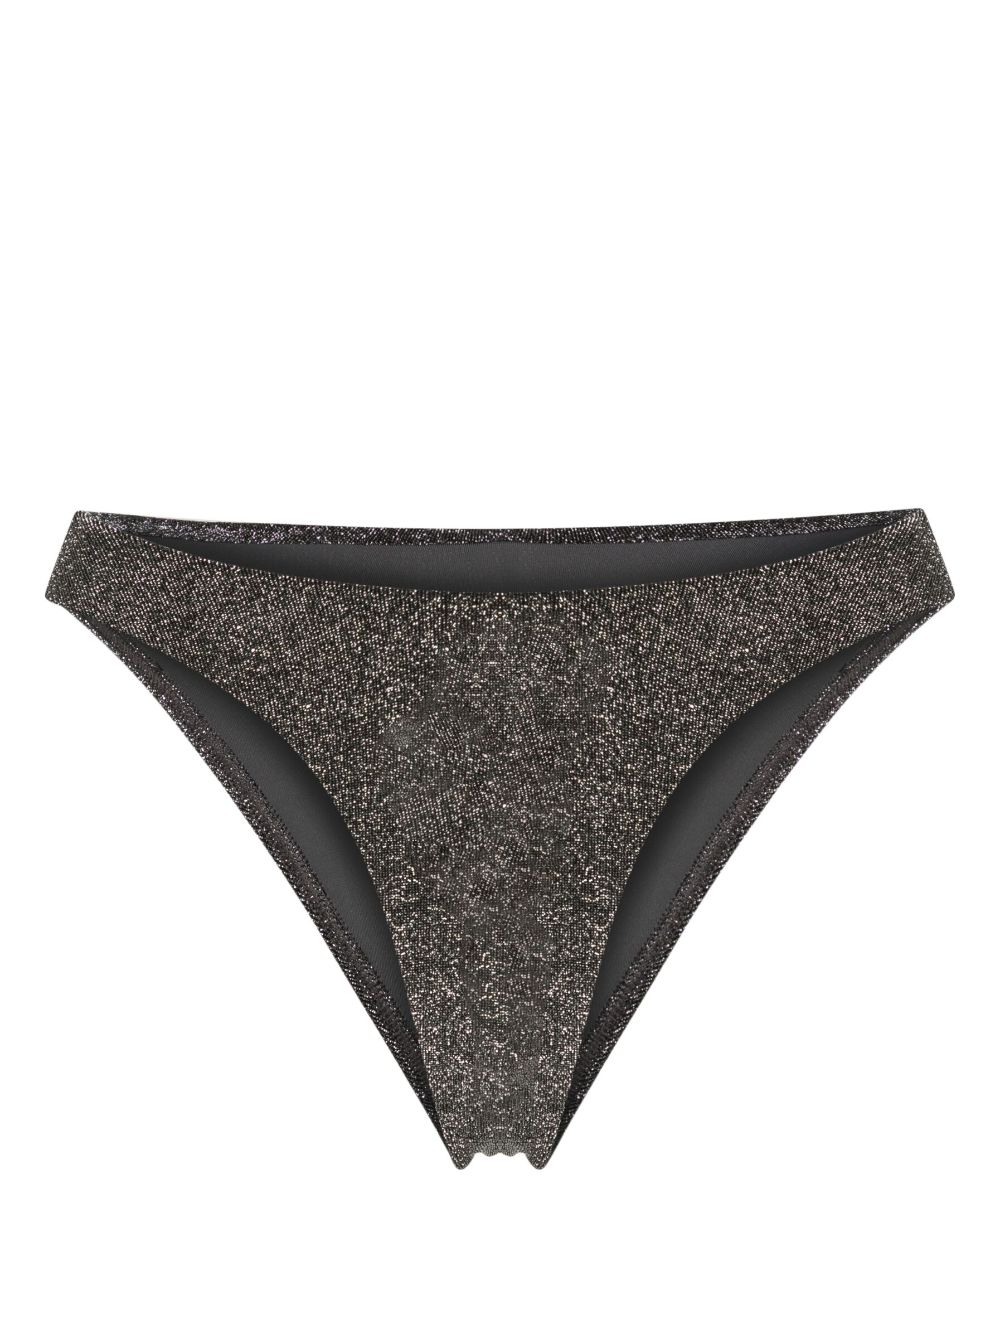 Form and Fold The 90s Staple bikini bottoms - Silver von Form and Fold